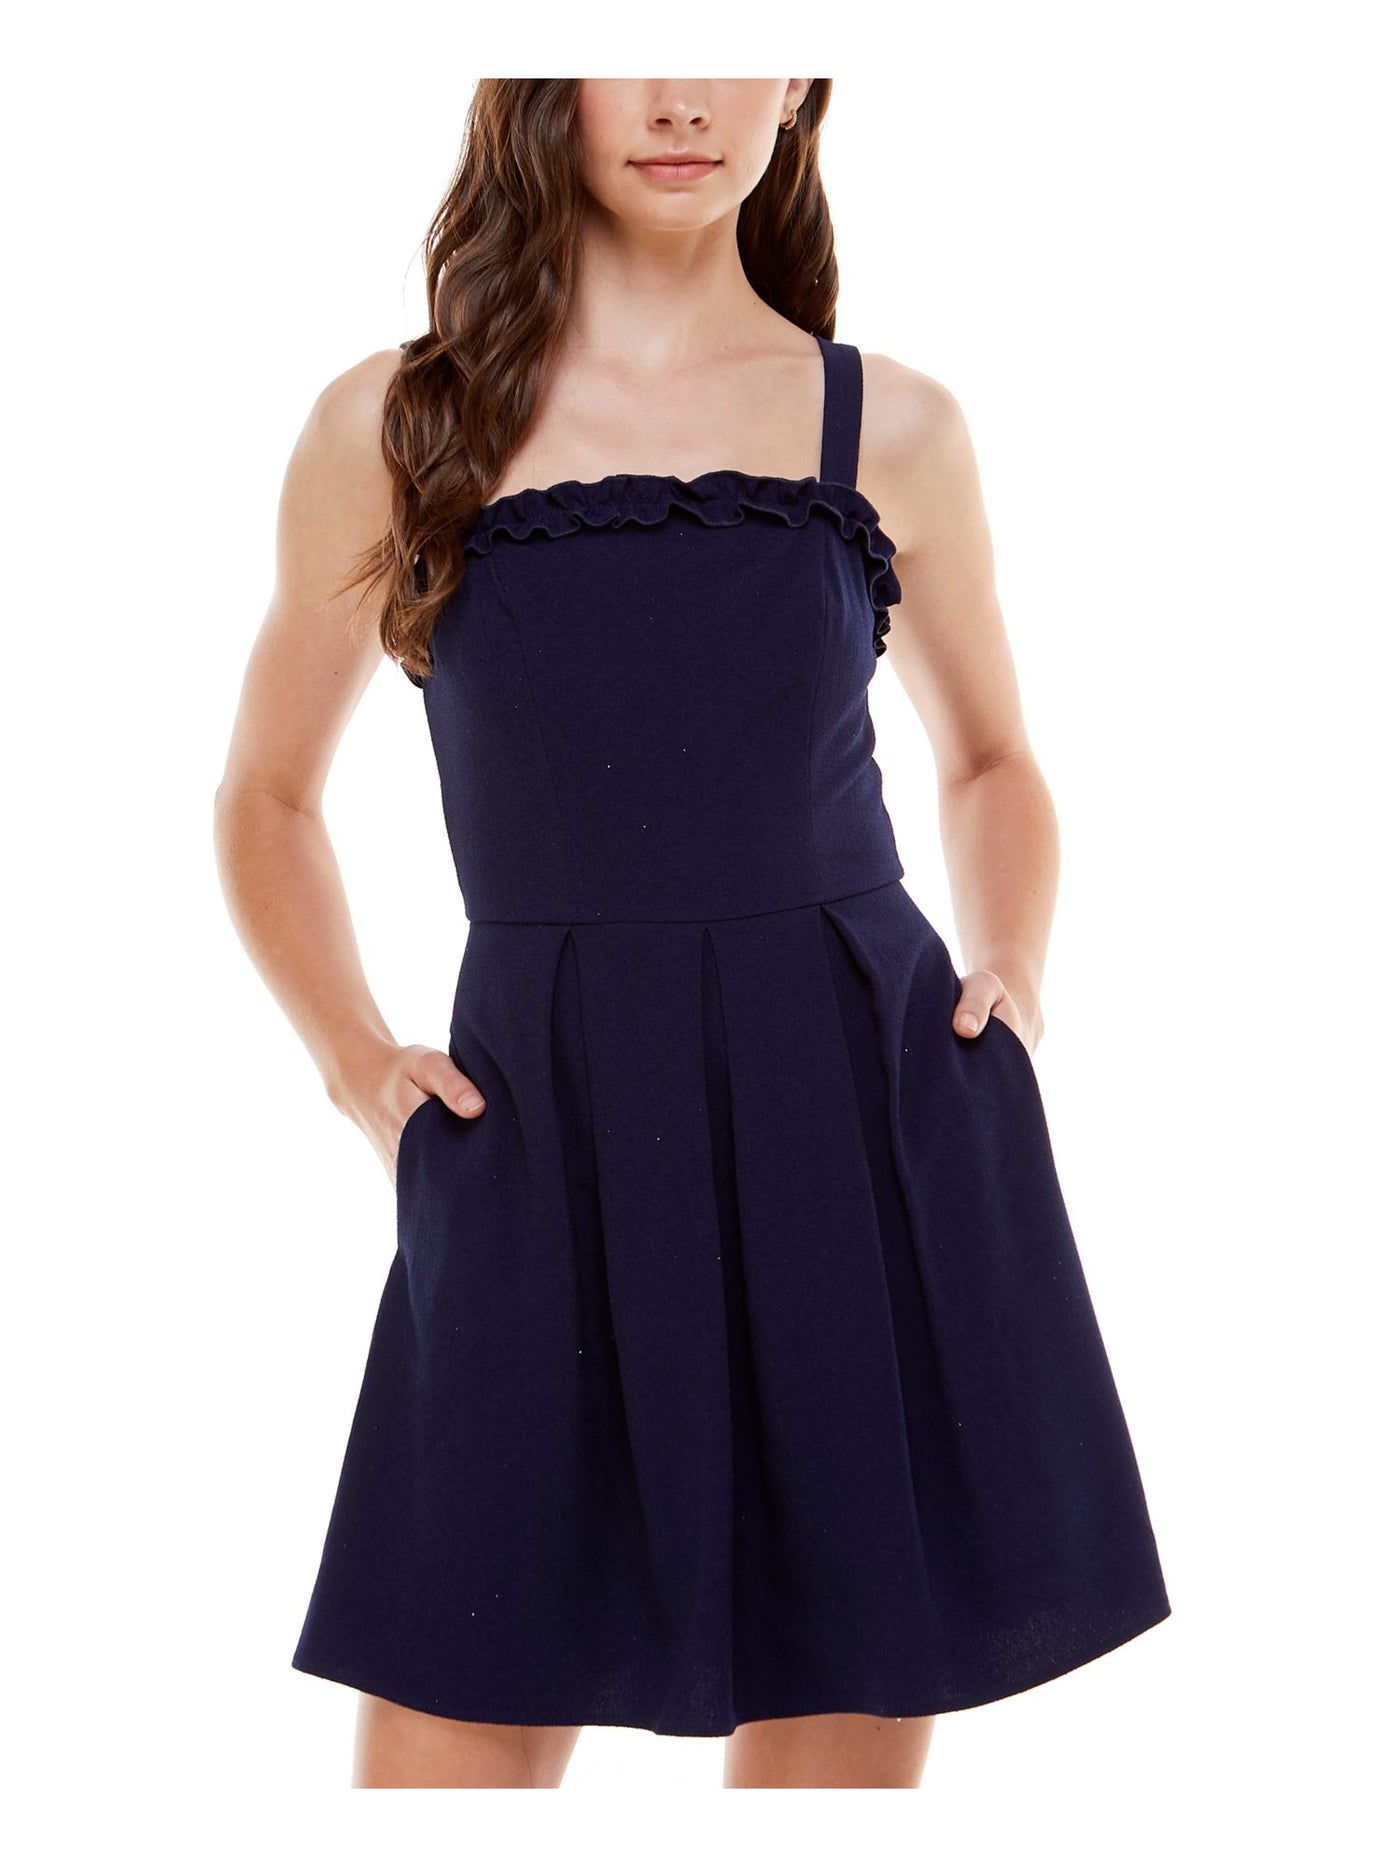 SPEECHLESS Womens Navy Stretch Zippered Pocketed Ruffled Pleated Sleeveless Square Neck Mini Party Fit + Flare Dress Juniors XXS